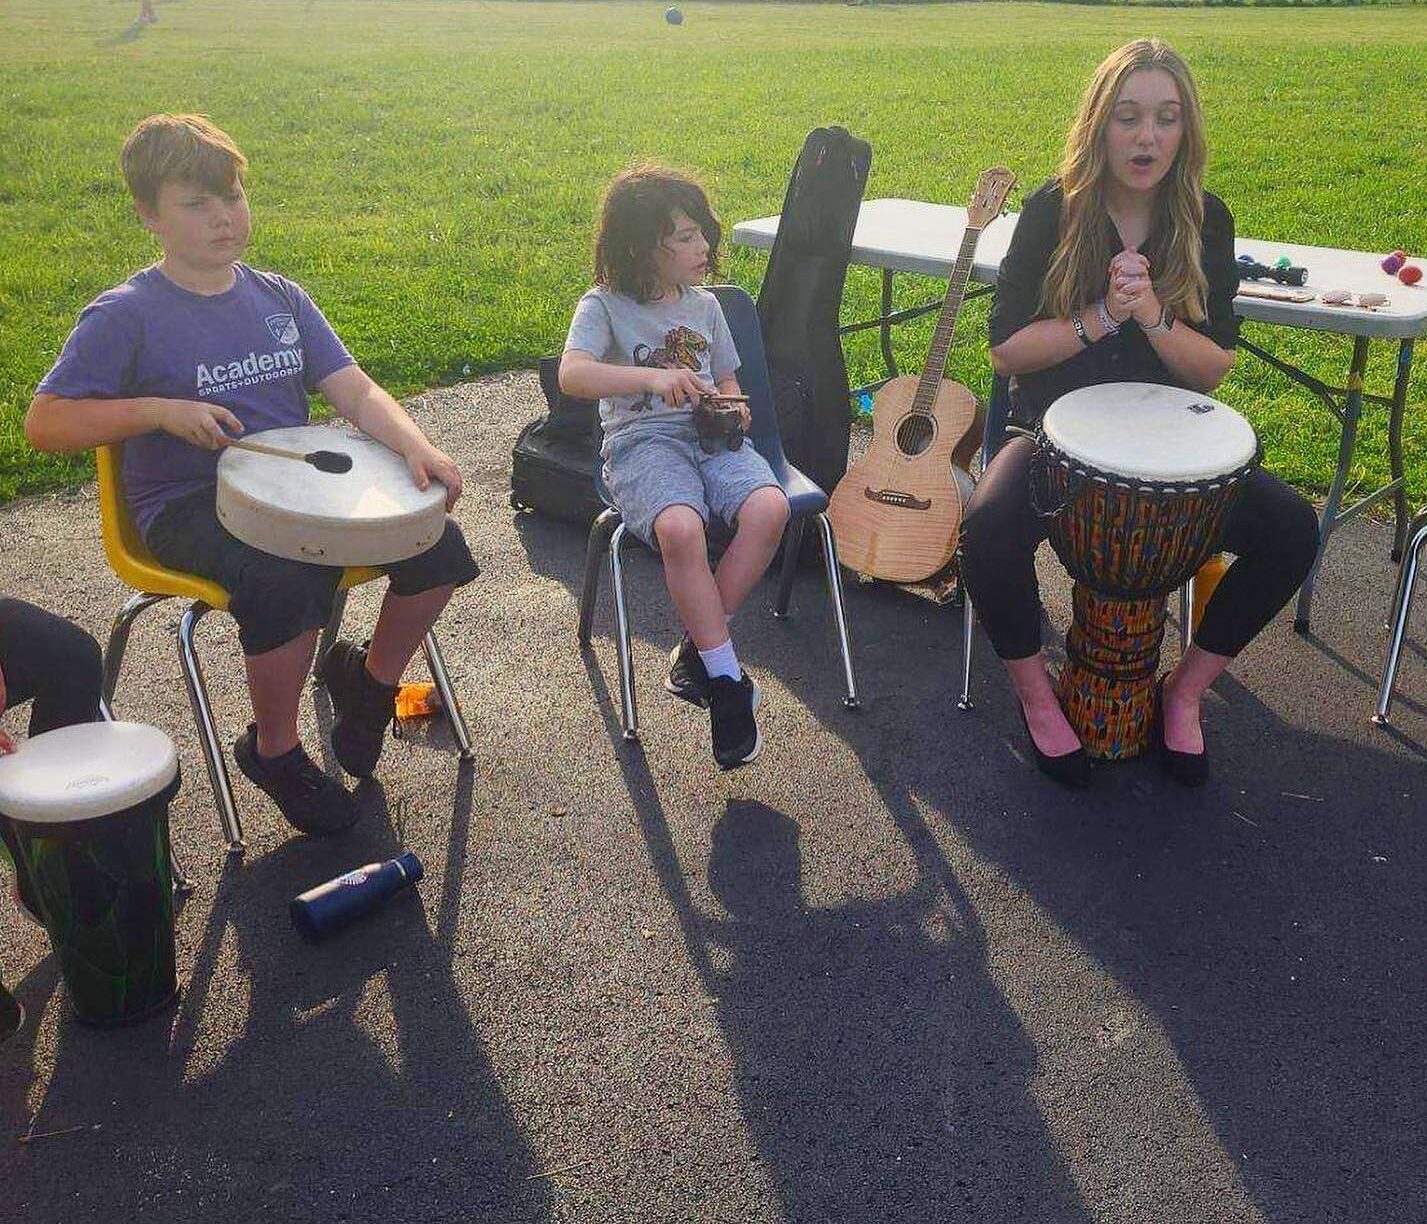 A woman sits outside at a chair with a large drum. Two kids are beside her holding other drums. A guitar leans against a table behind them.